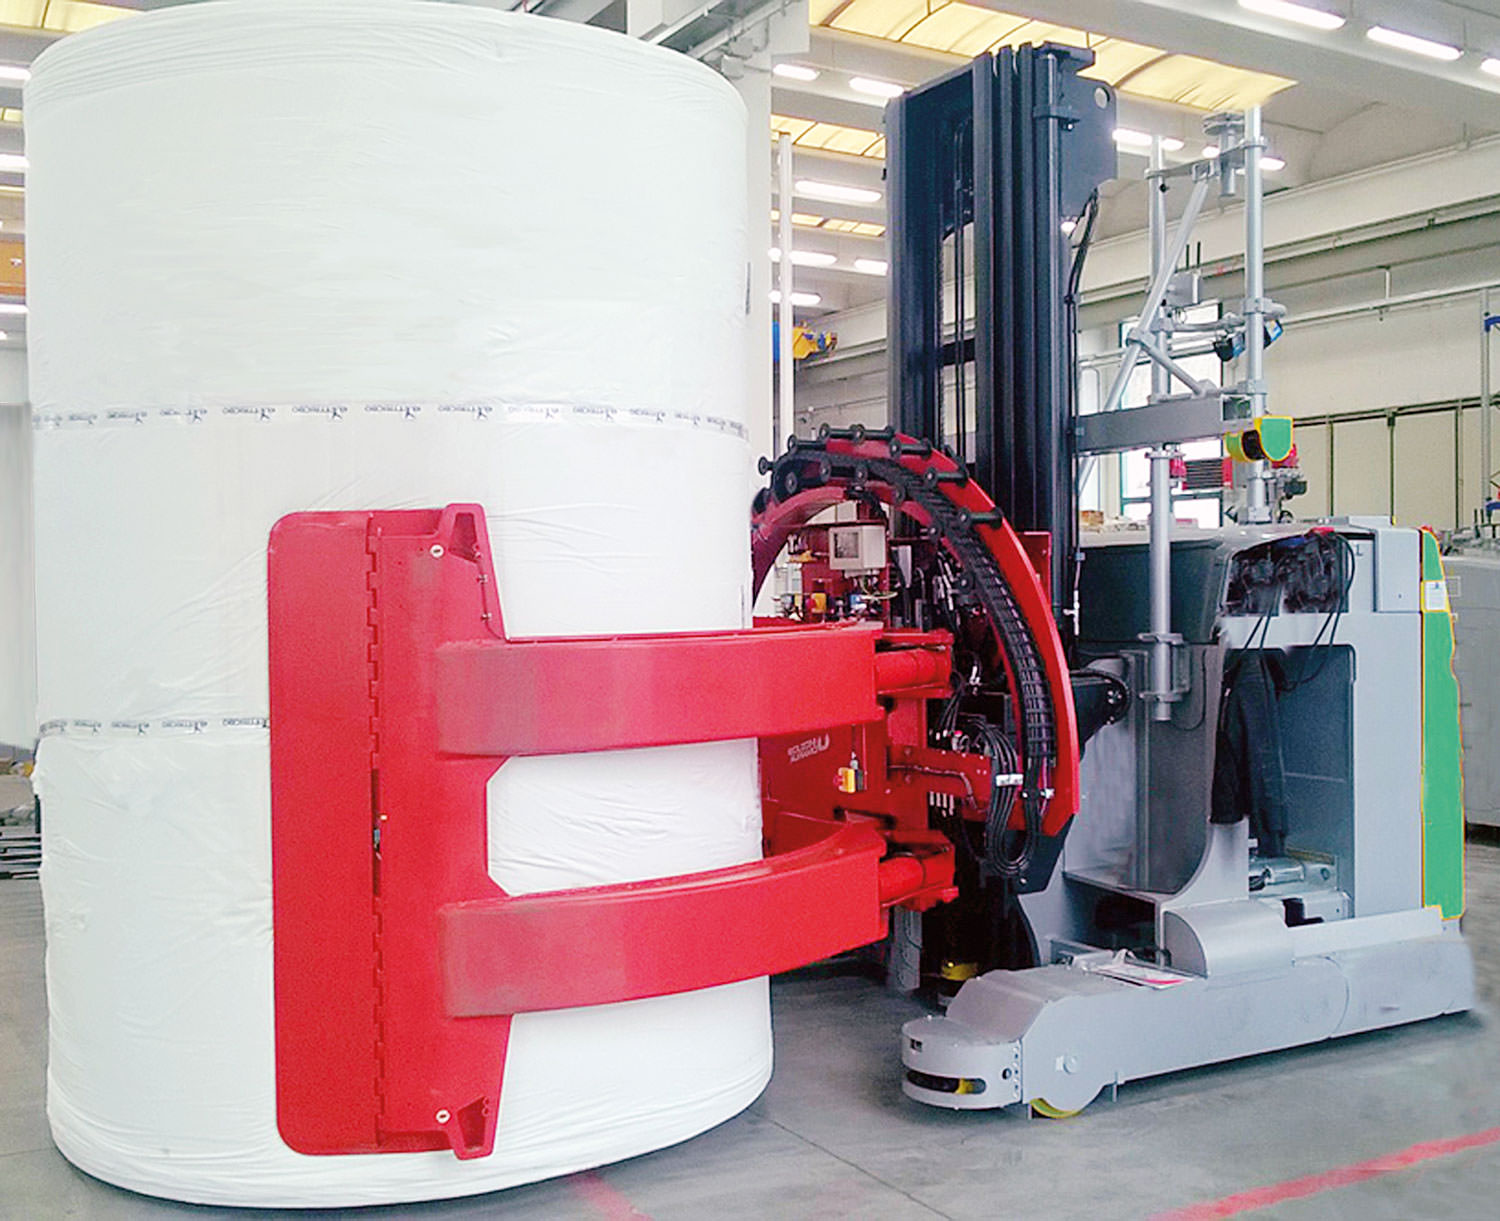 AGV fitted with Auramo paper roll clamp. For this application we recommend the 180-degree rotation, for fast and precise handling of horizontal and vertical rolls.